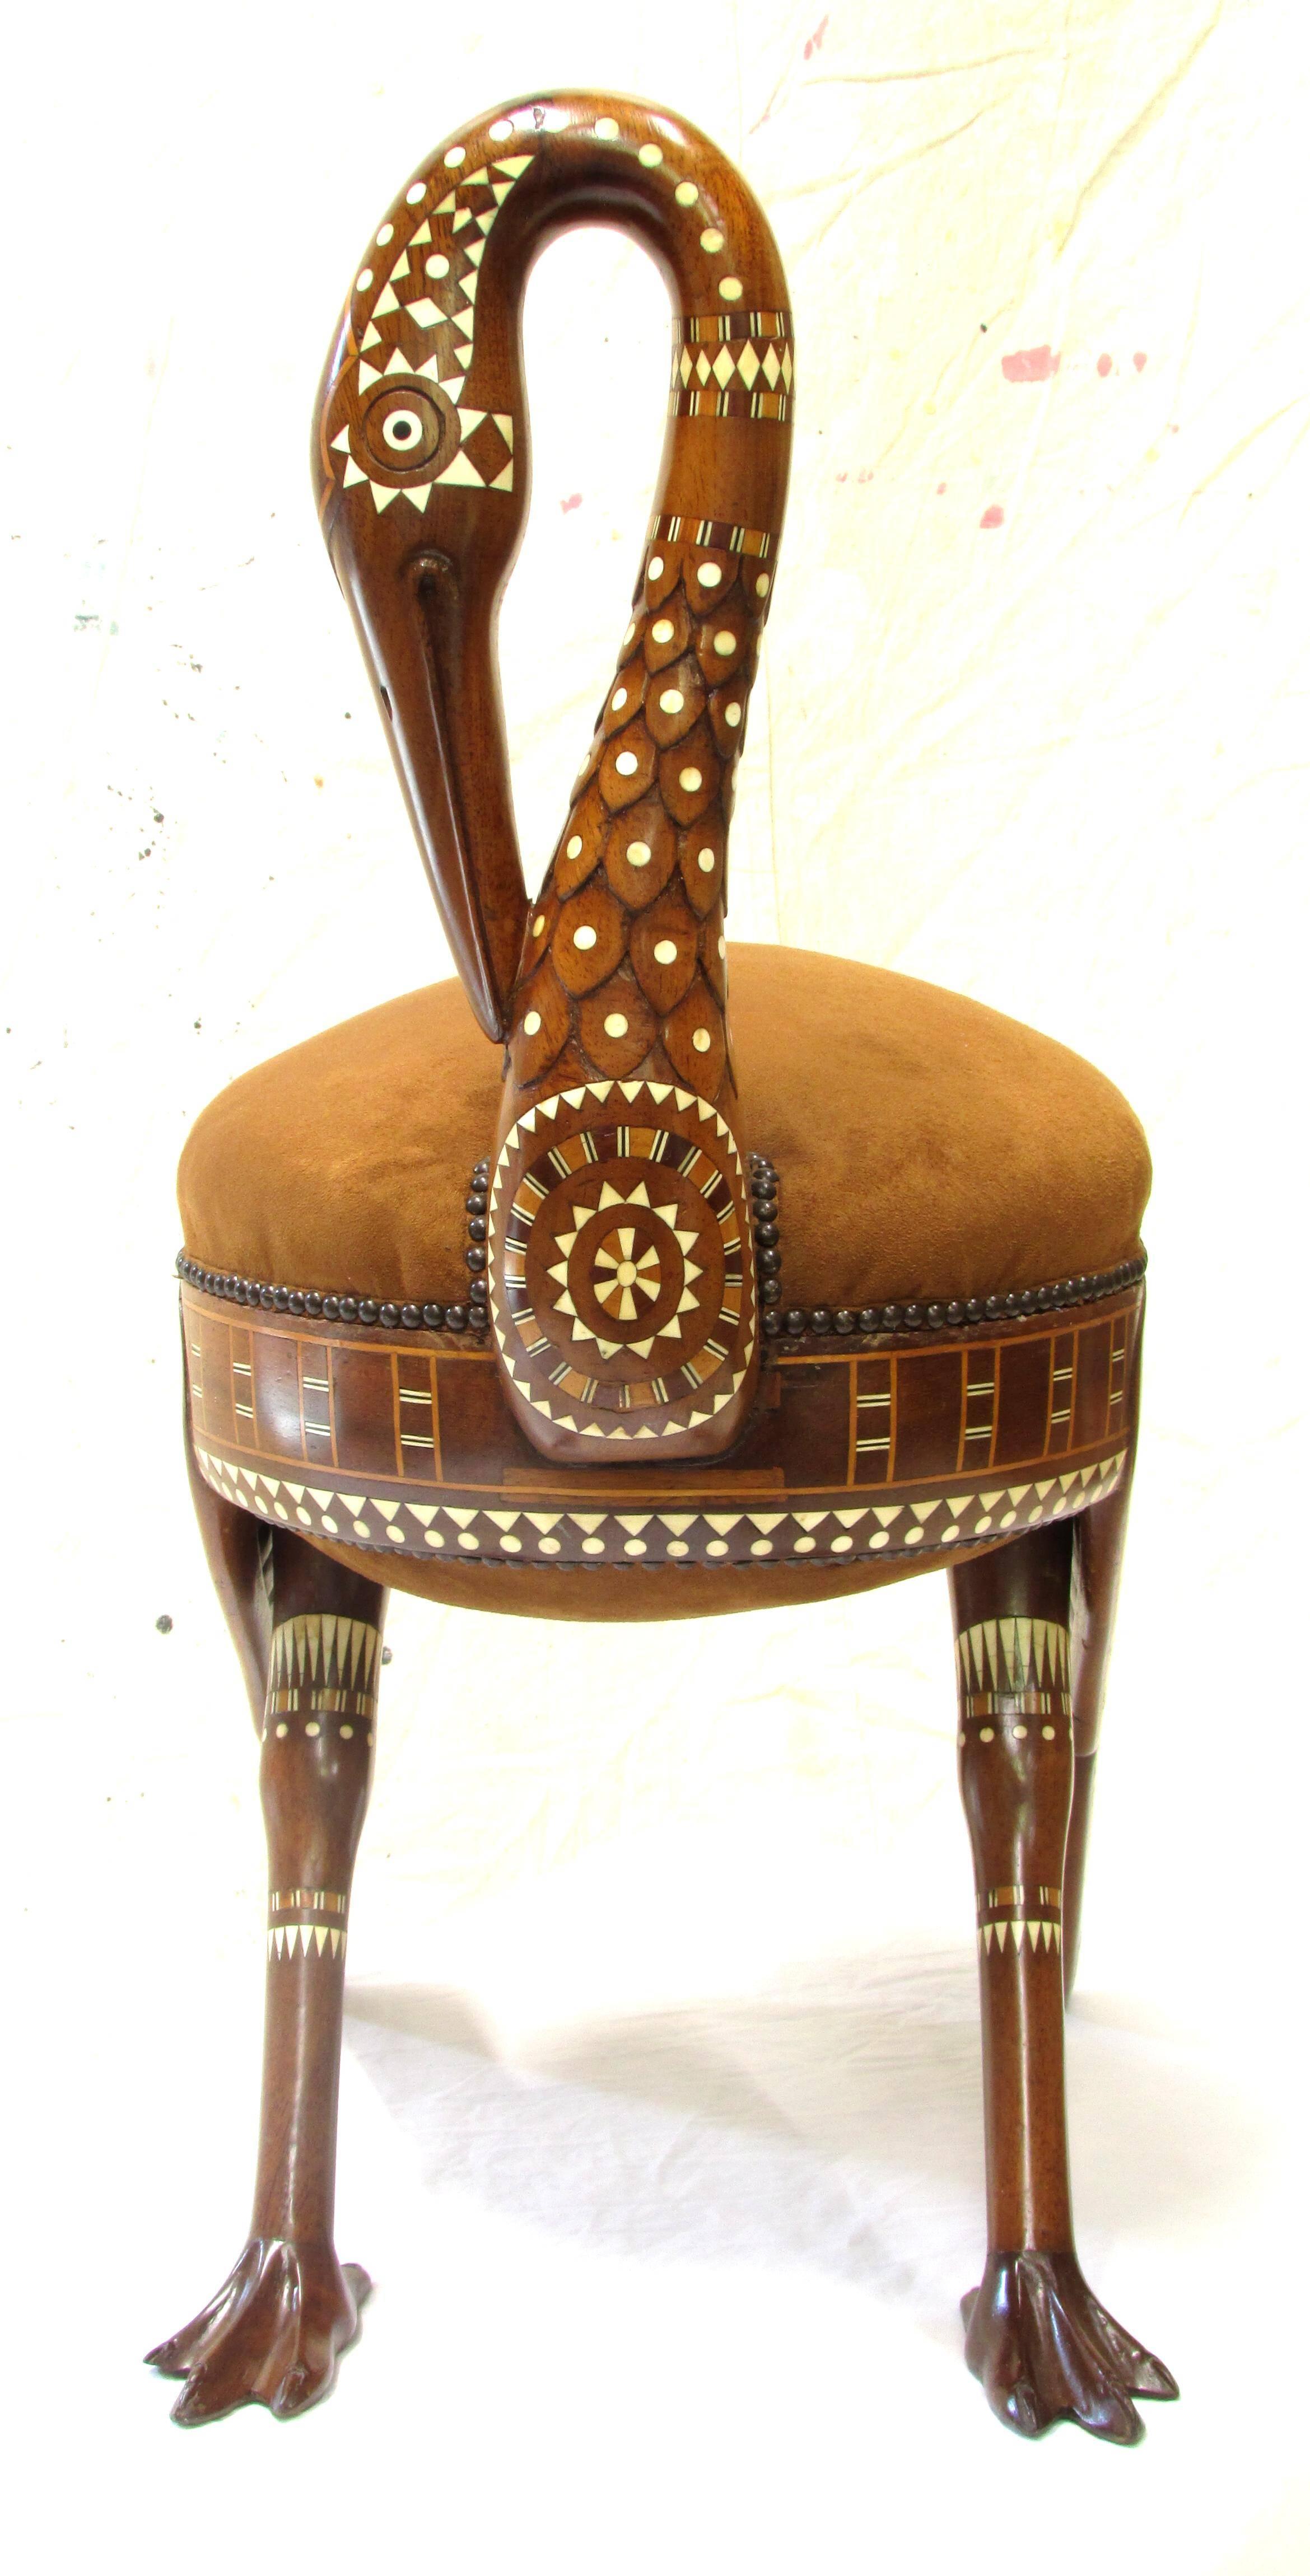 An Egyptian revival inlaid cedar wood stool in the form of a sacred Ibis with padded oval seat on stylized wings and legs, made of cedar with inlaid bone, sandalwood and mahogany the stool was made at the height of the Egyptian mania following the